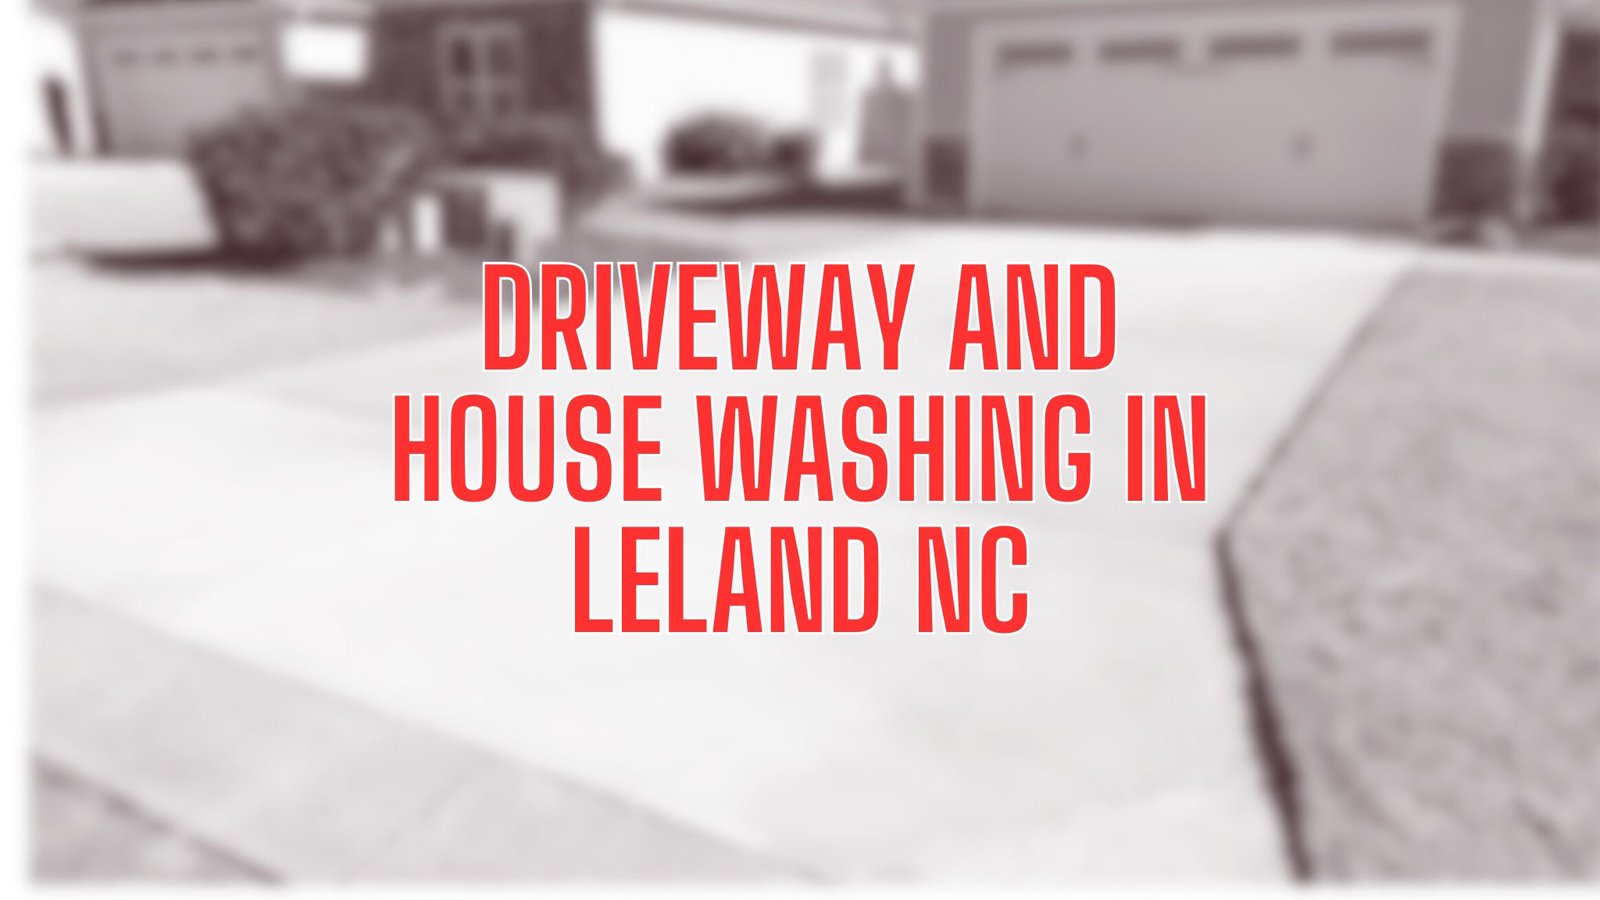 driveway and house washing in leland nc